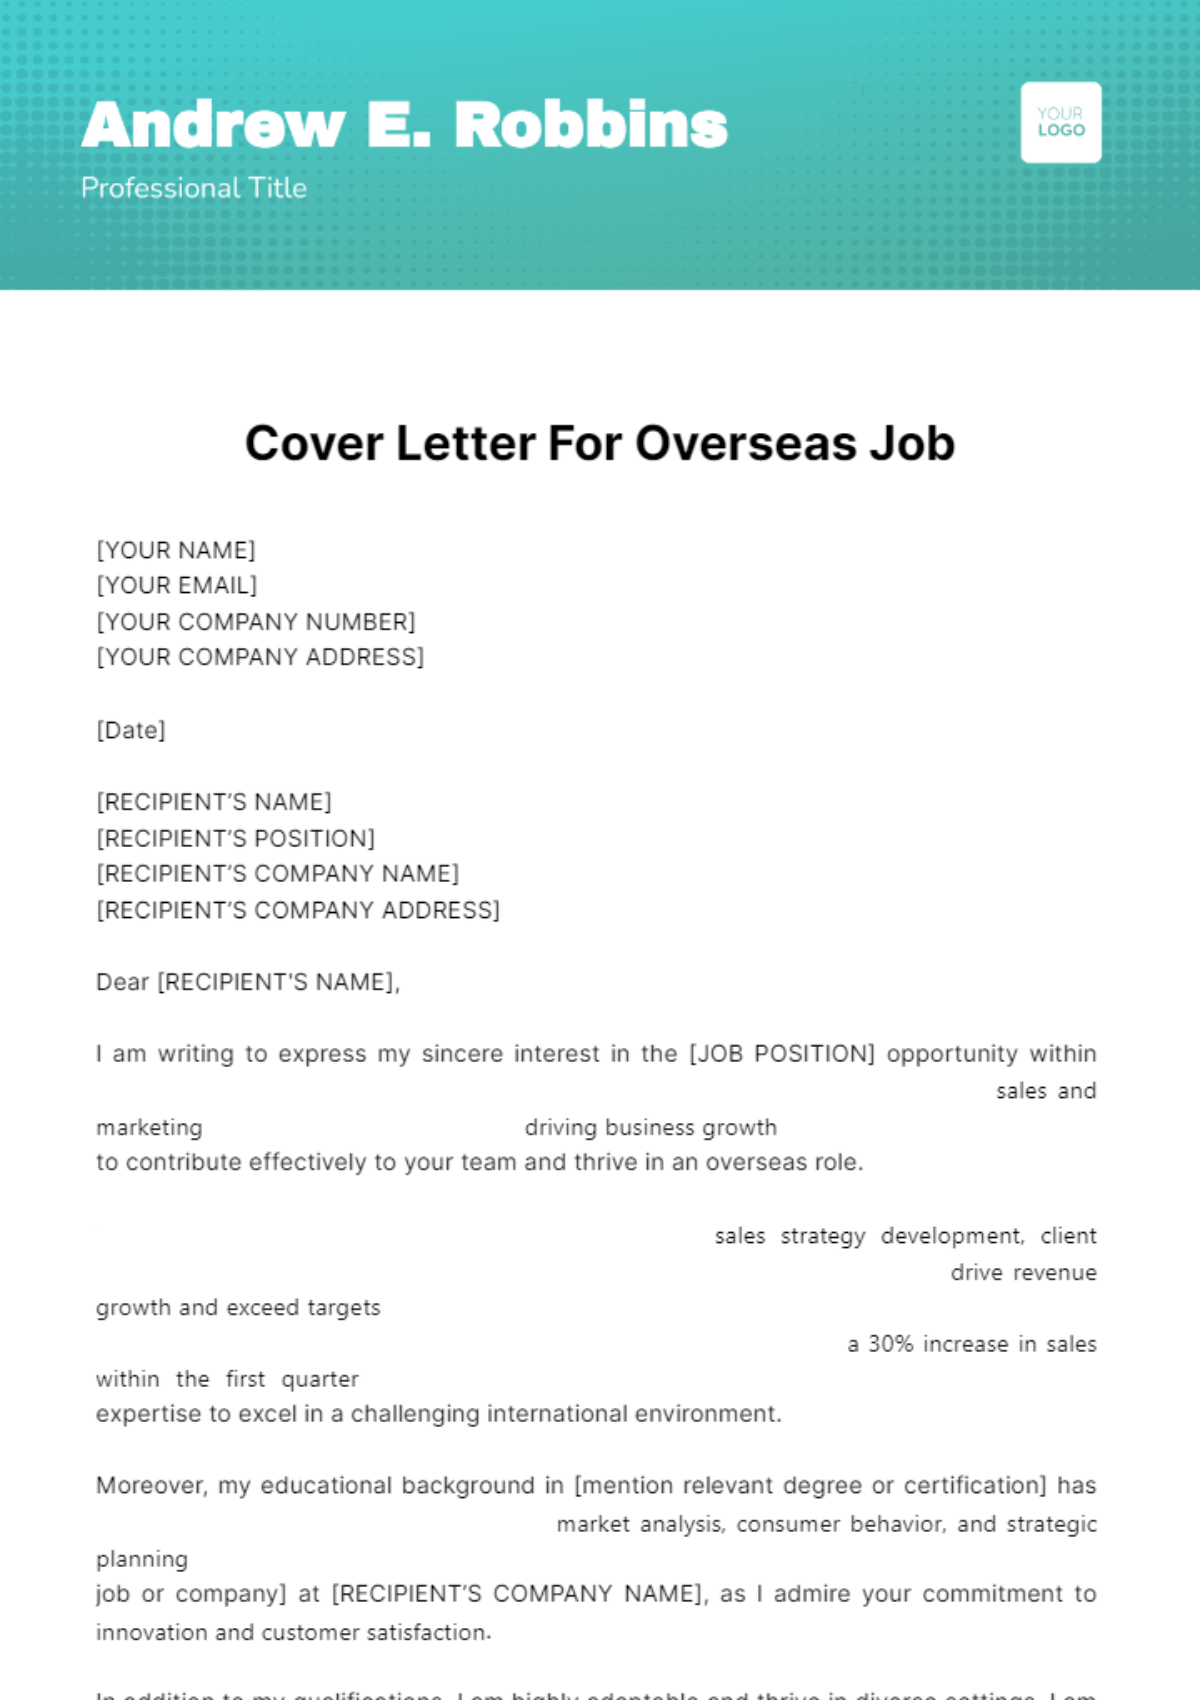 Cover Letter For Overseas Job Template